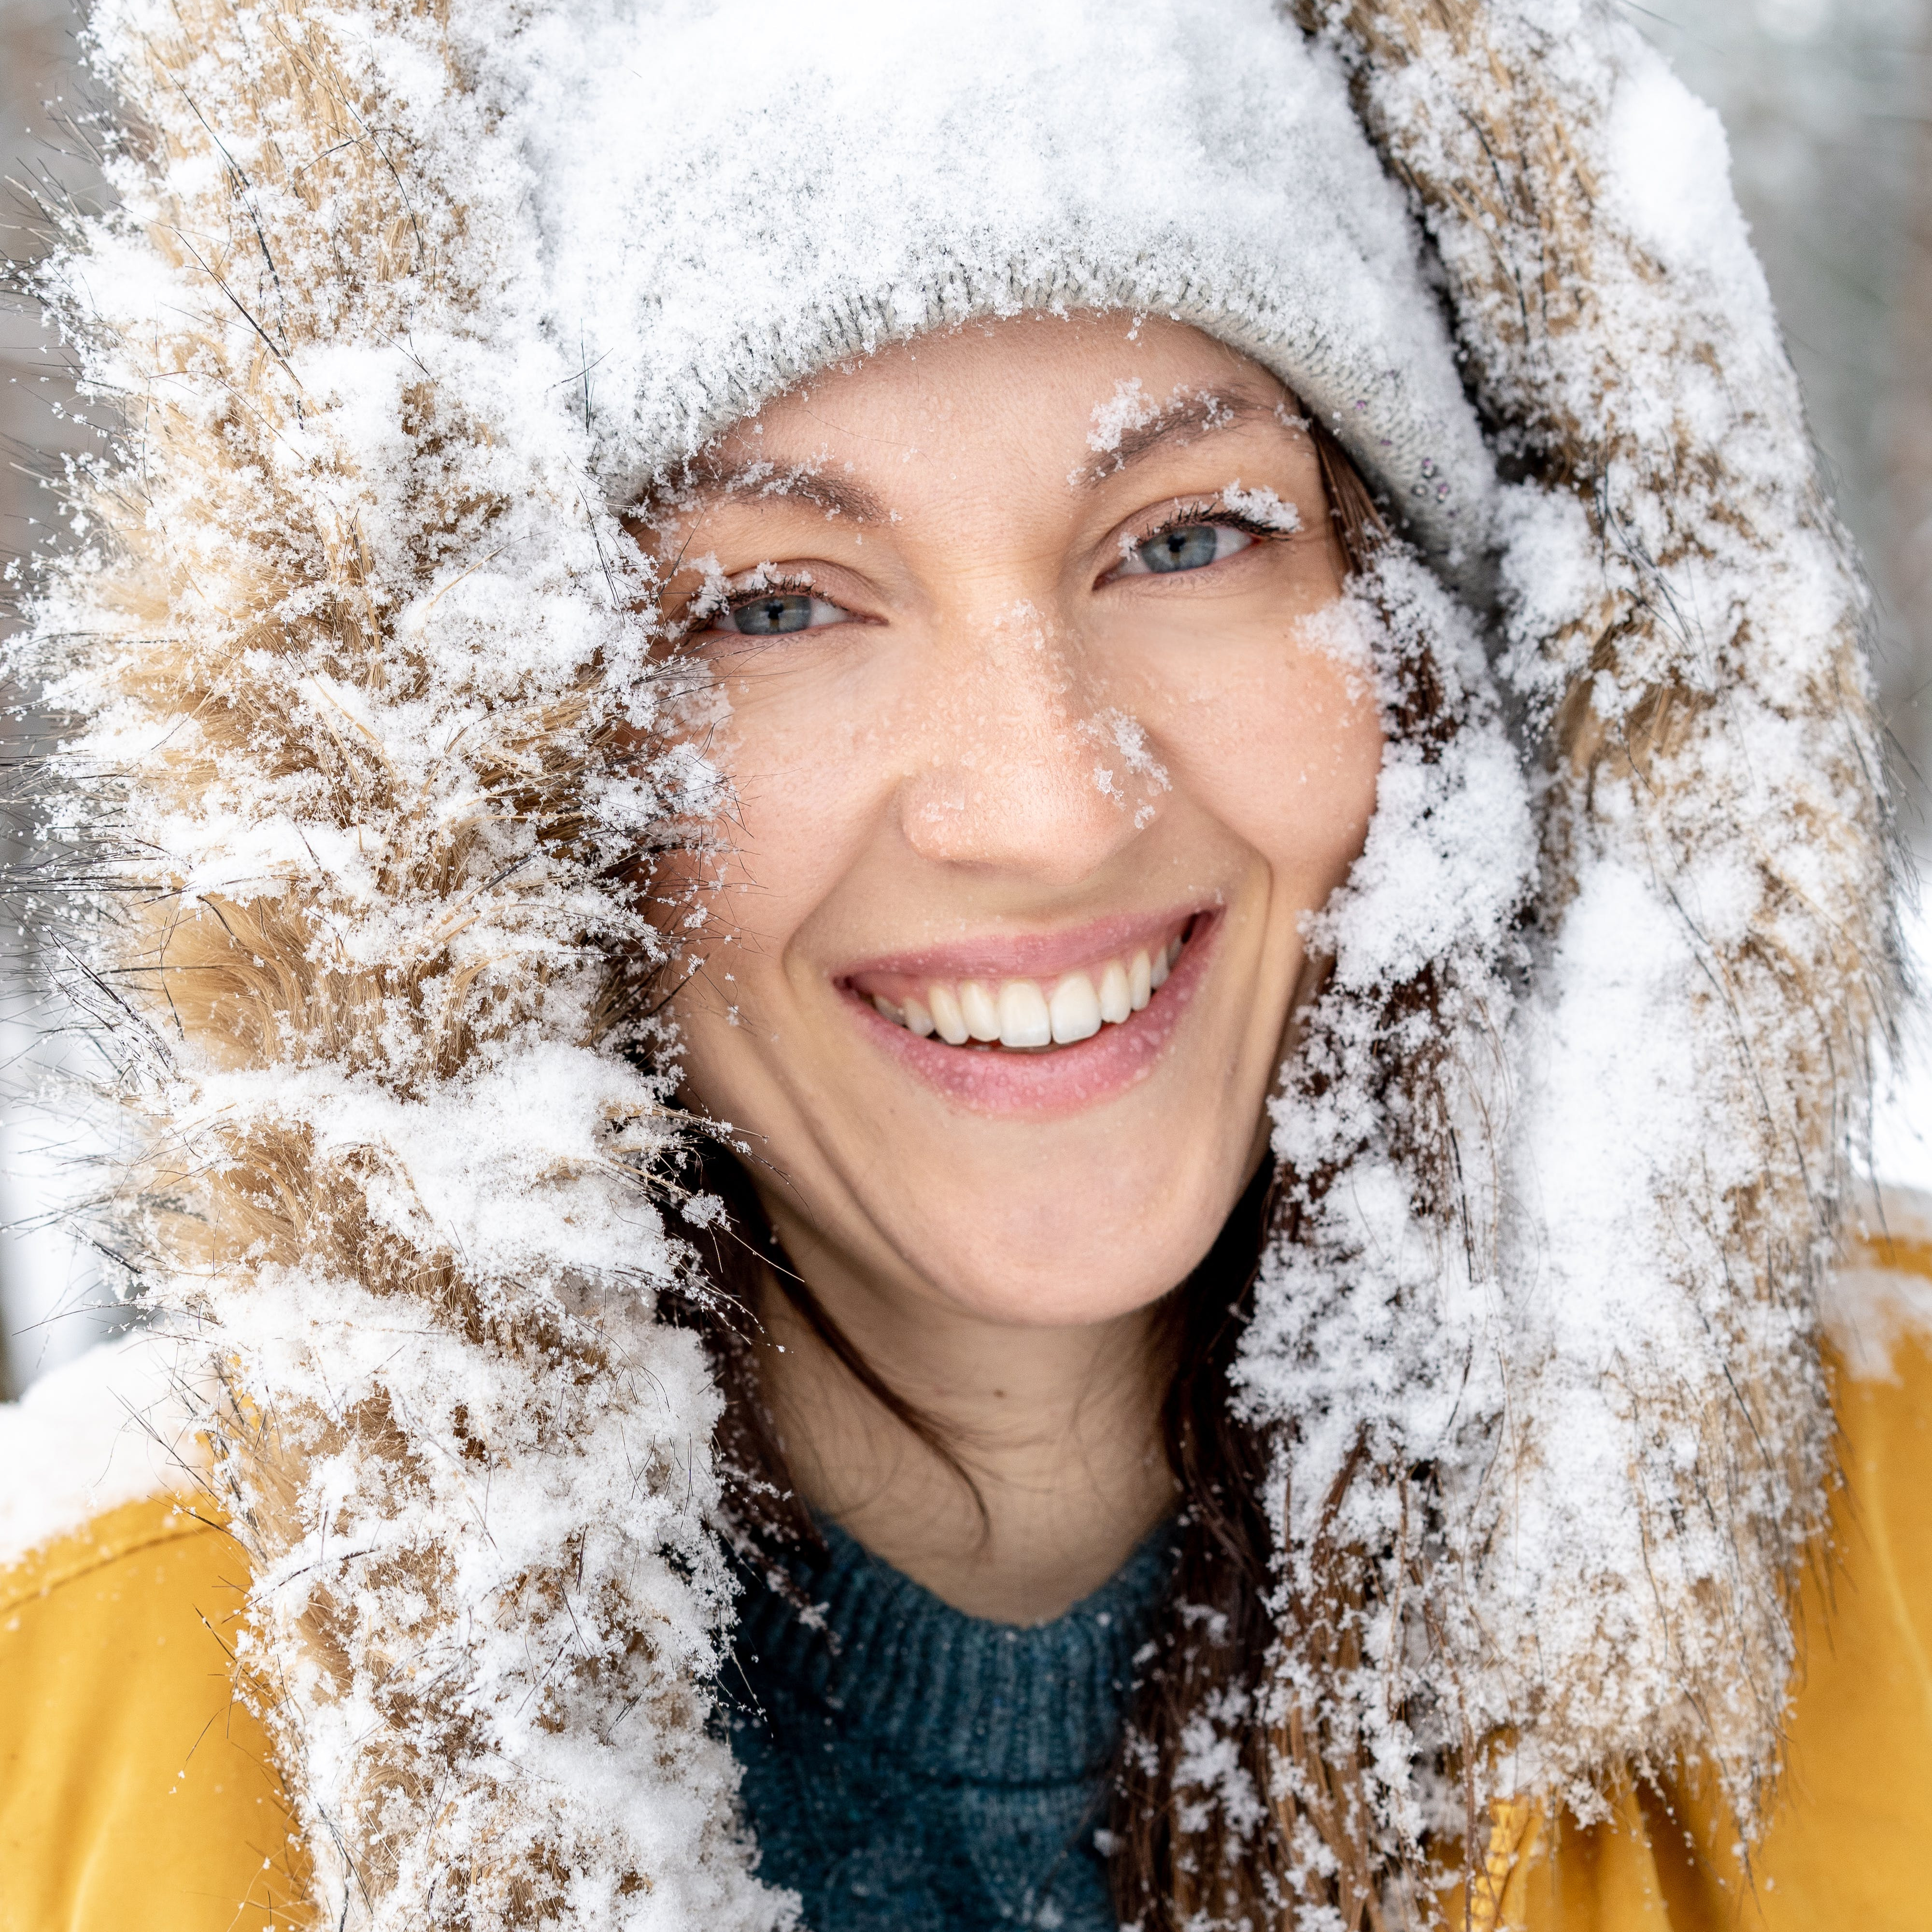 Photo of Smiling Woman Covered in Snow